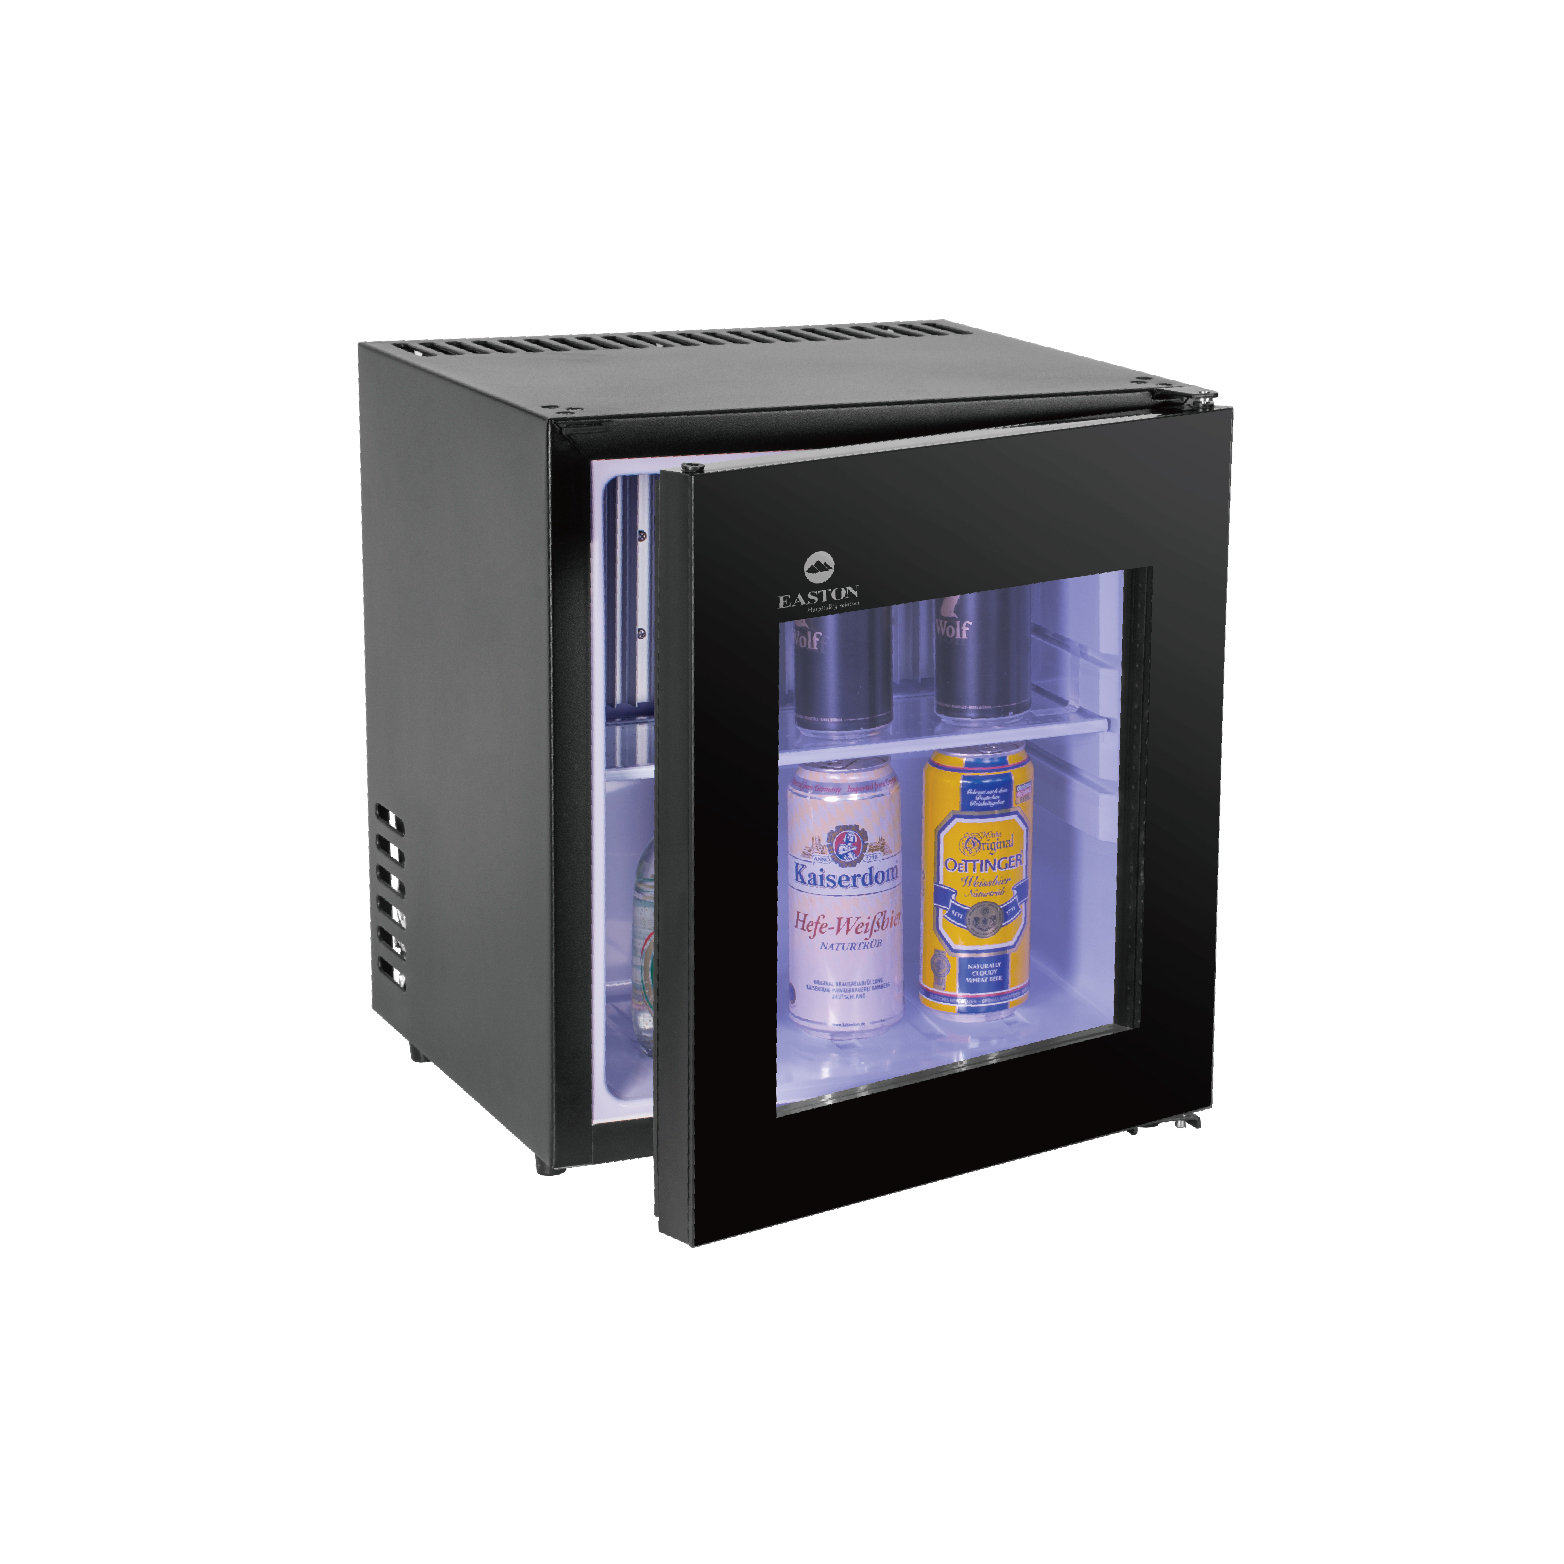 25L Capacity With Glass Door Hotel Completely Silent Absorption Minibar 